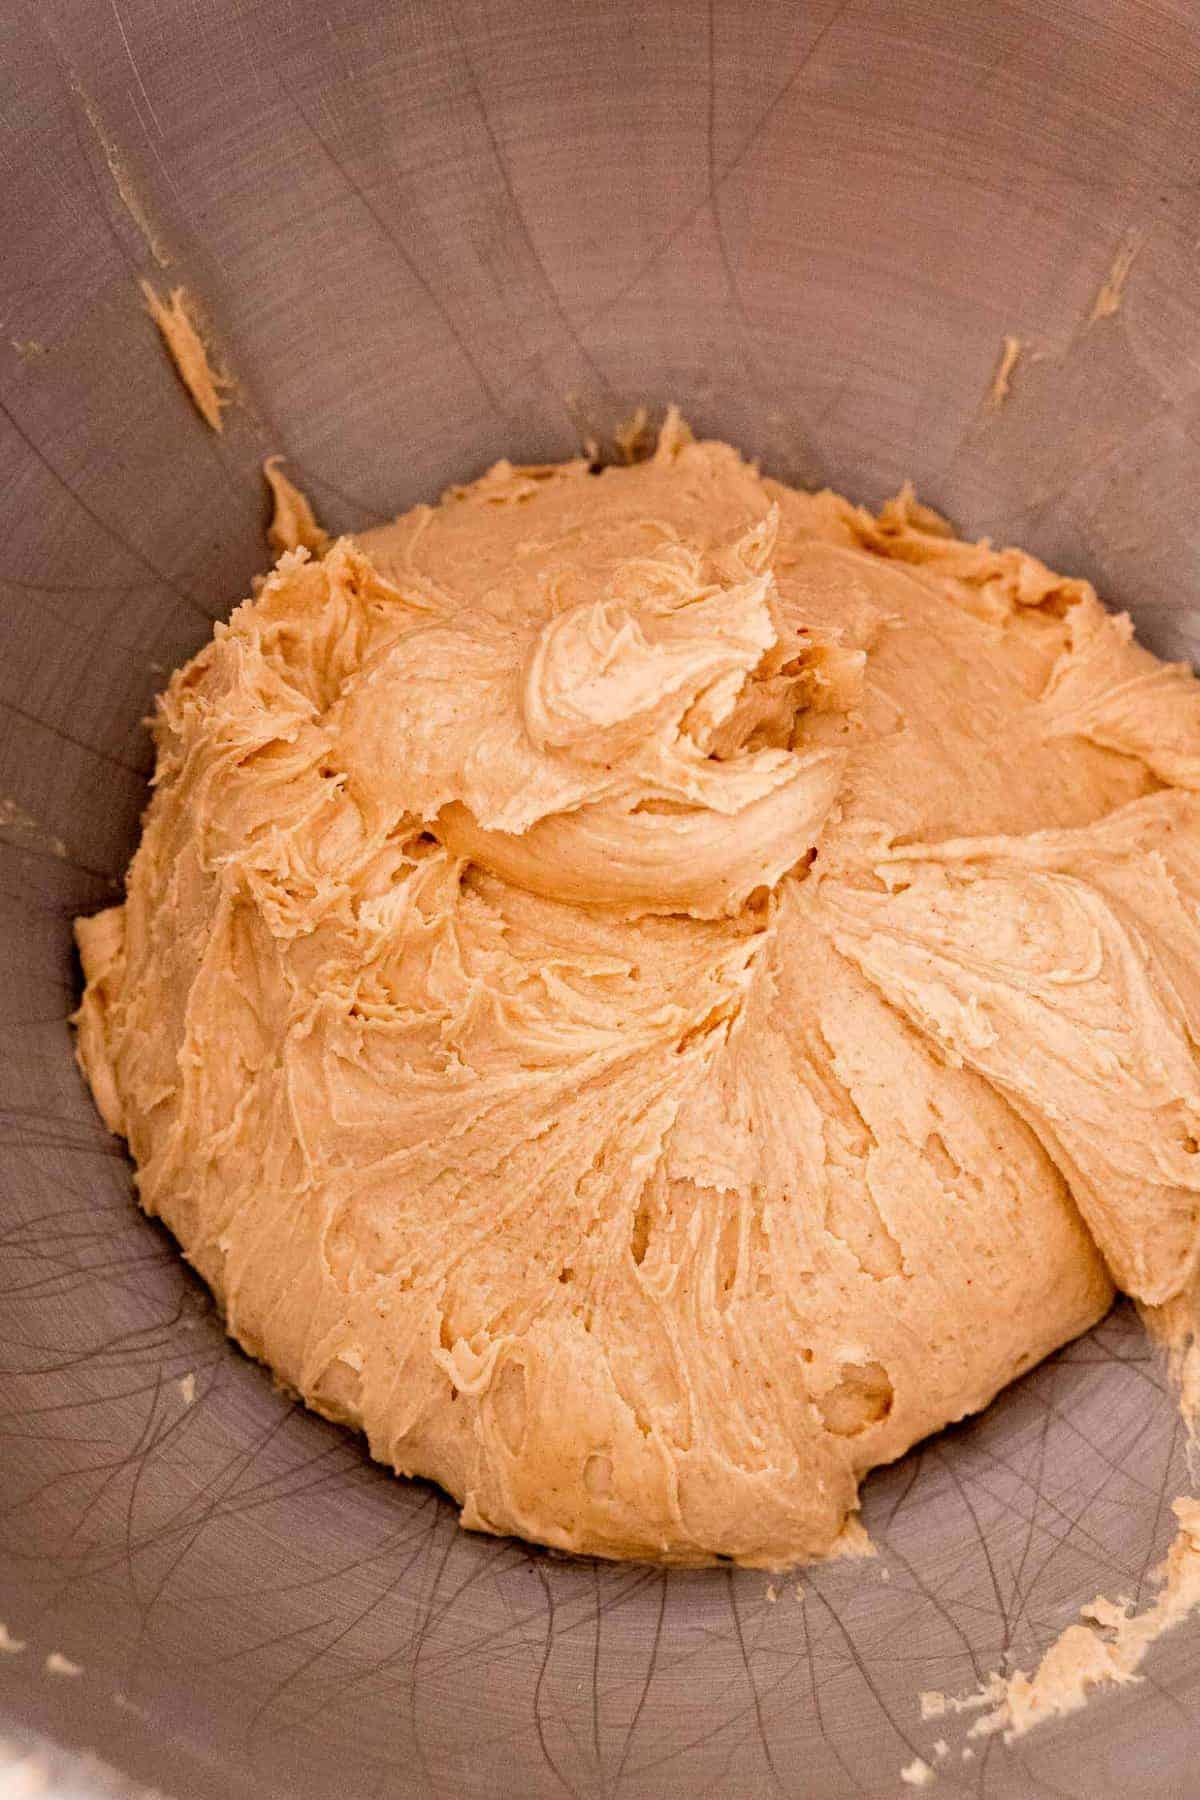 Peanut butter mixture in a metal bowl.